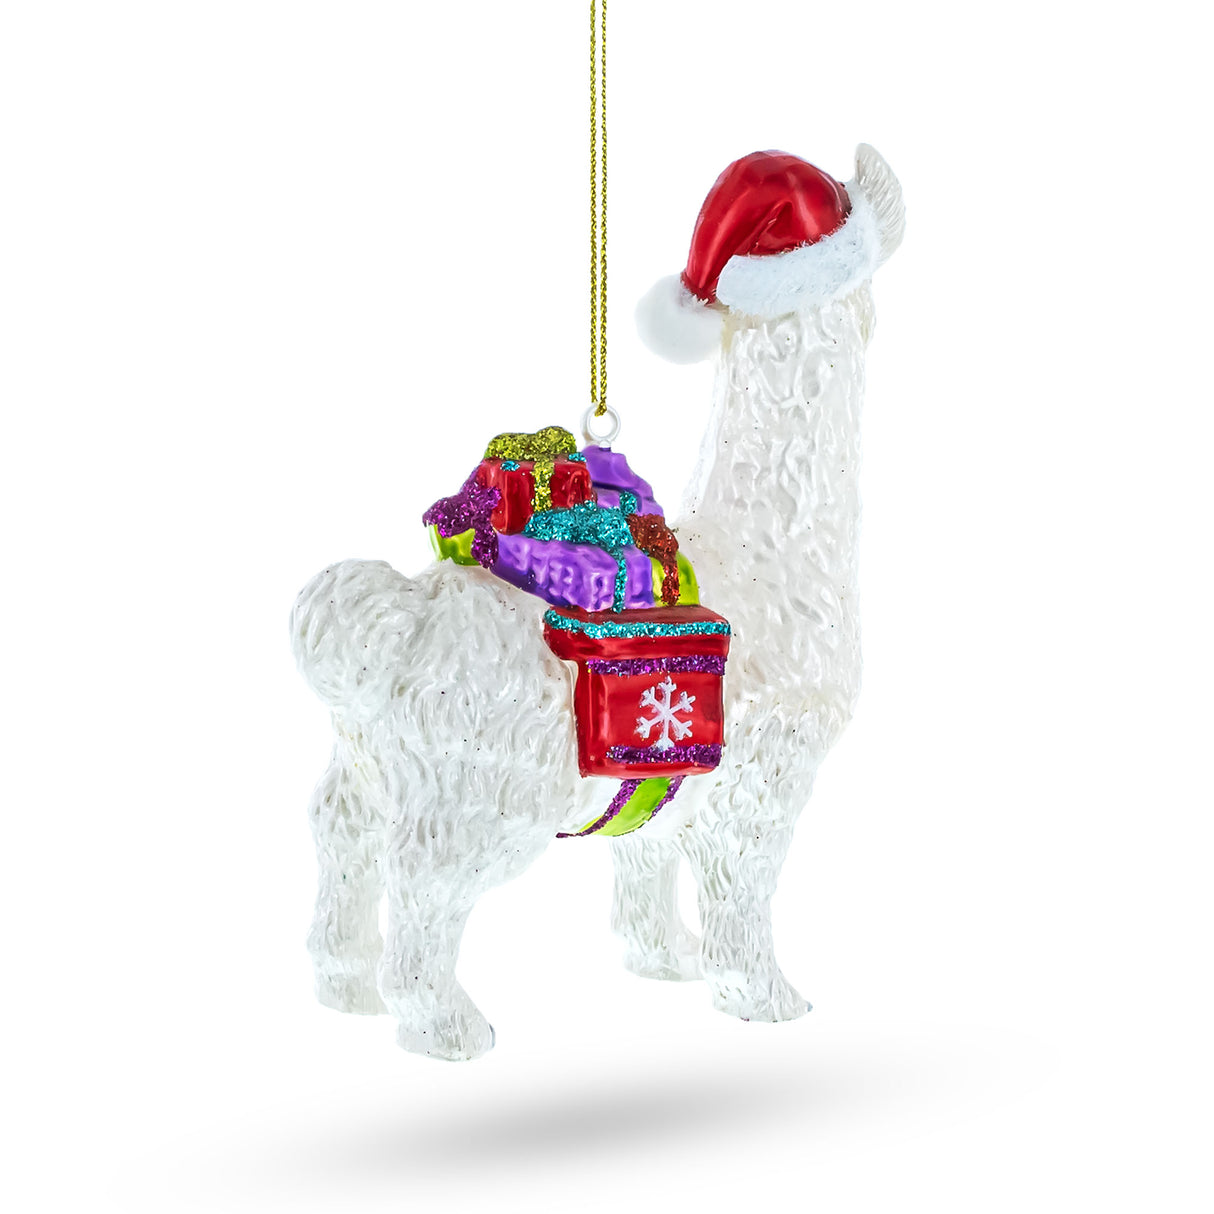 Festive Llama with Presents Blown Glass Christmas Ornament ,dimensions in inches: 4.6 x 1.7 x 3.4